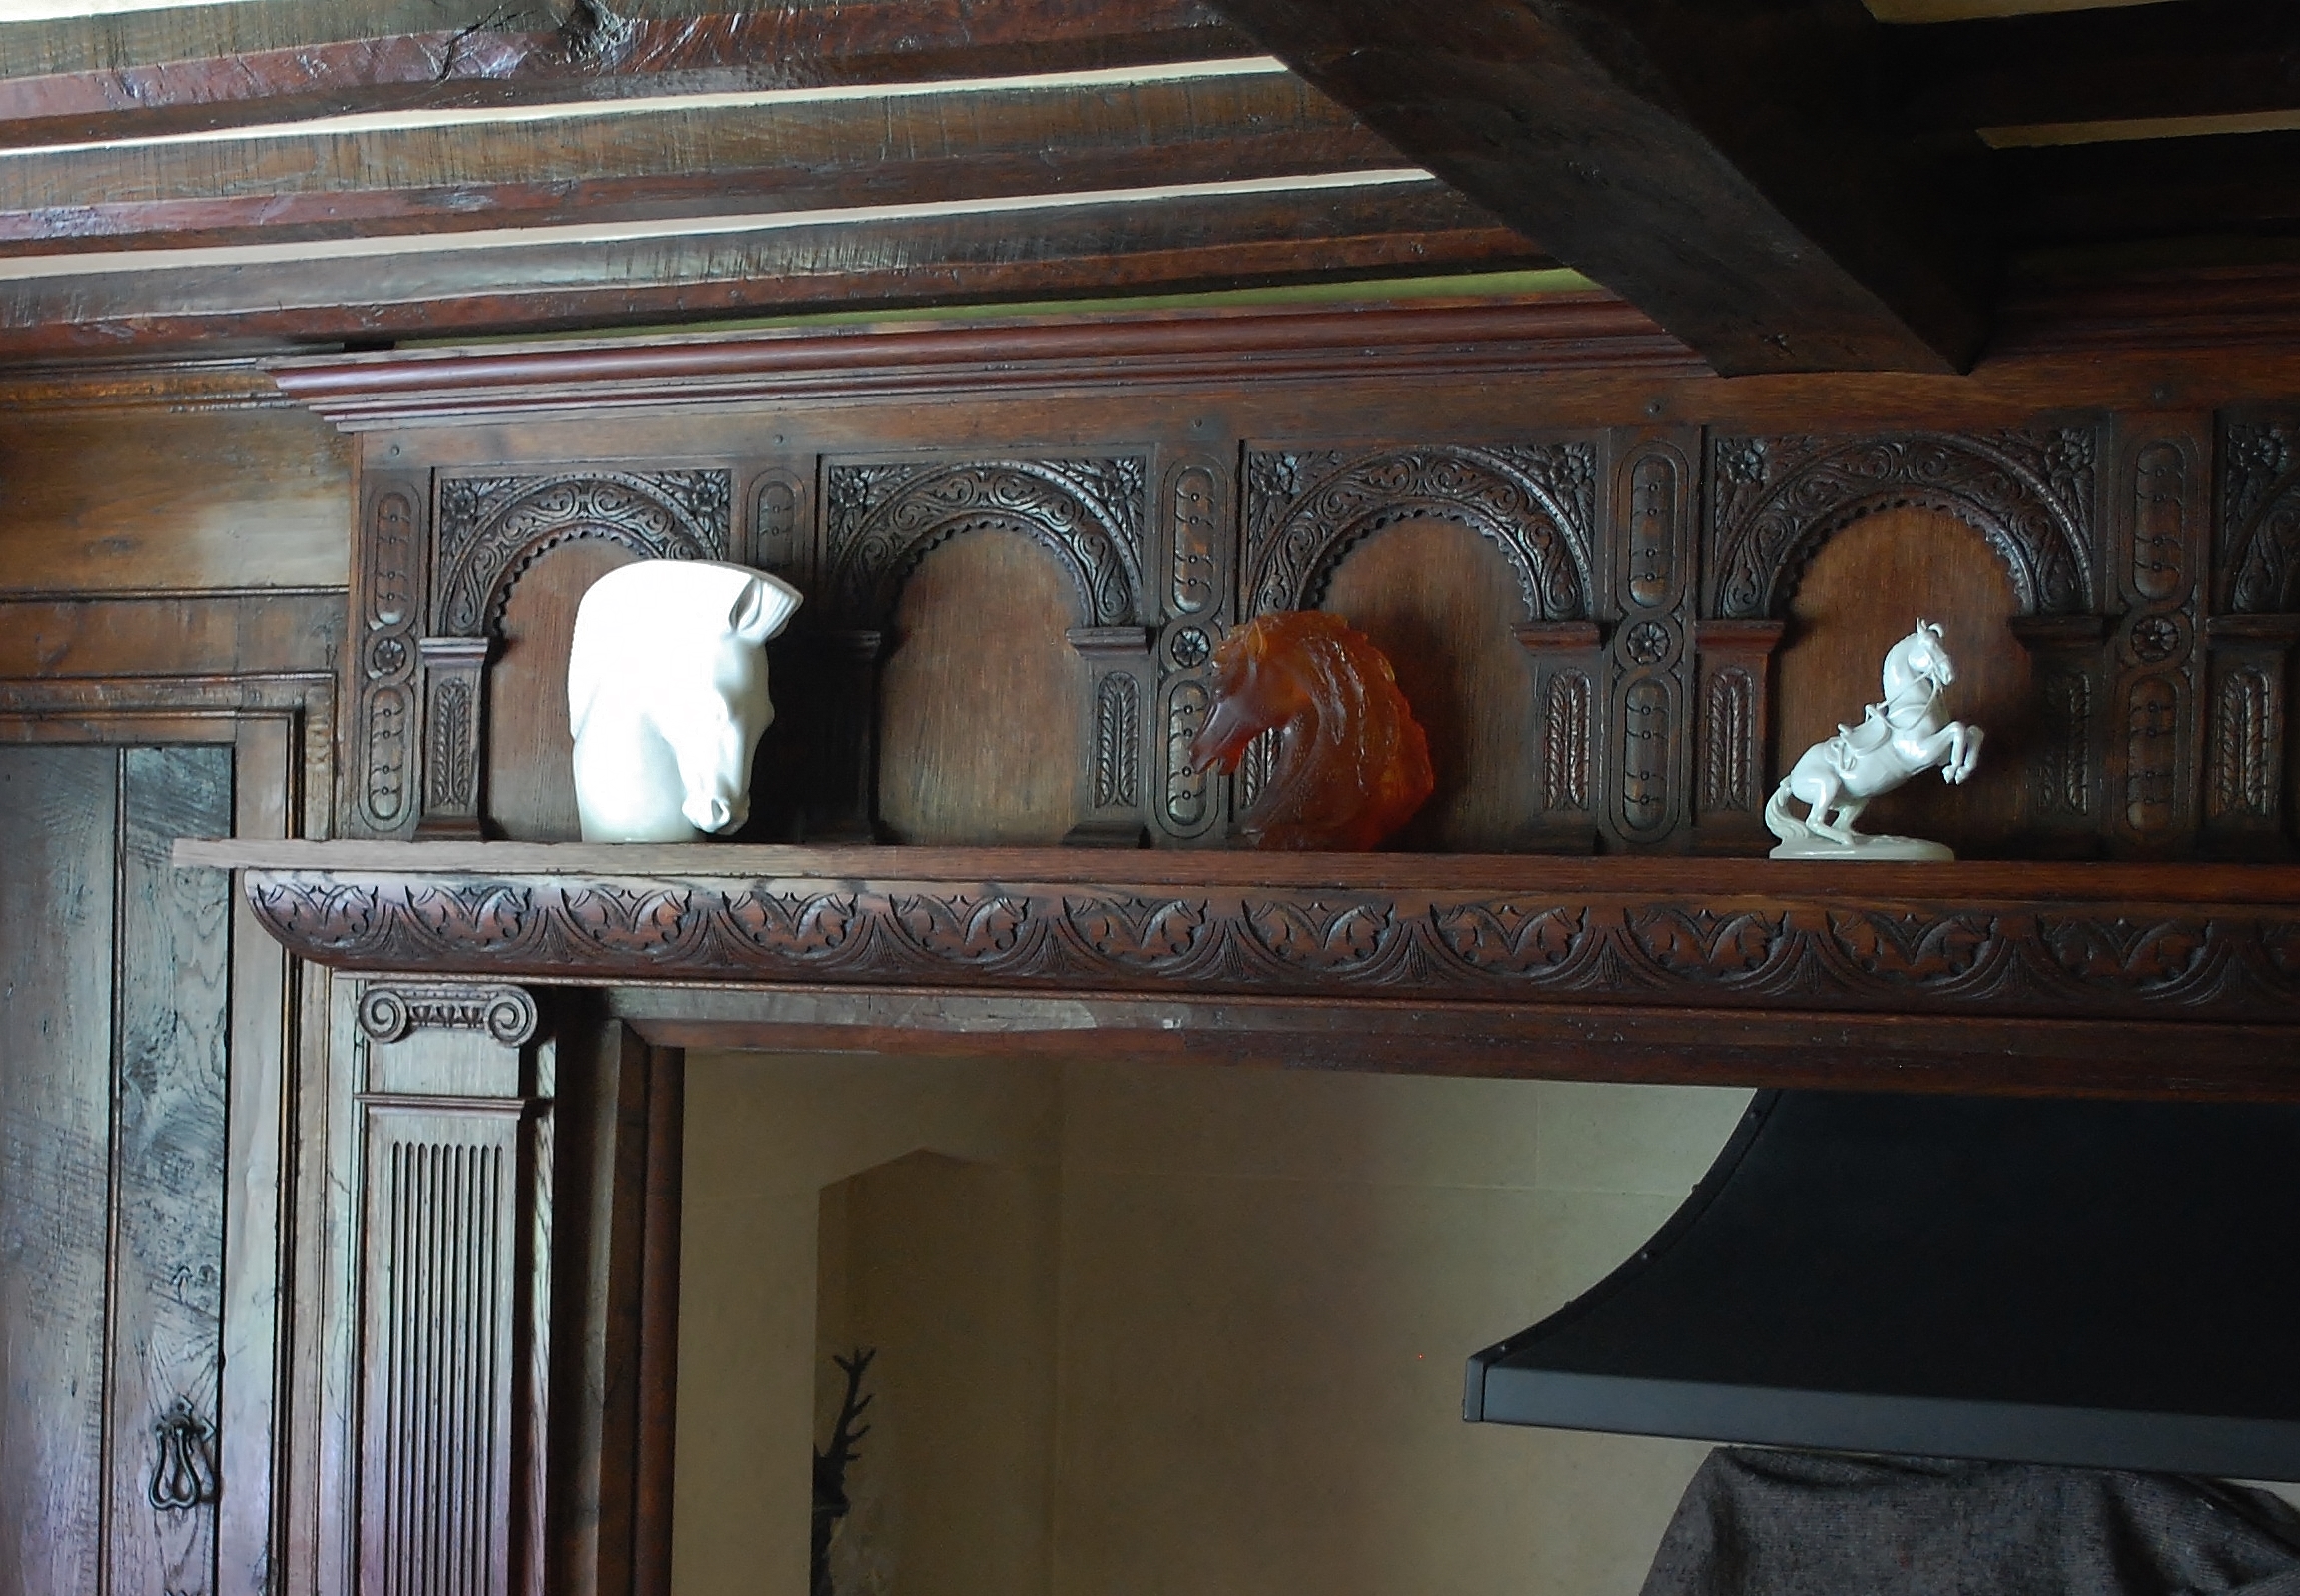 17th century style fire surround with carved arches